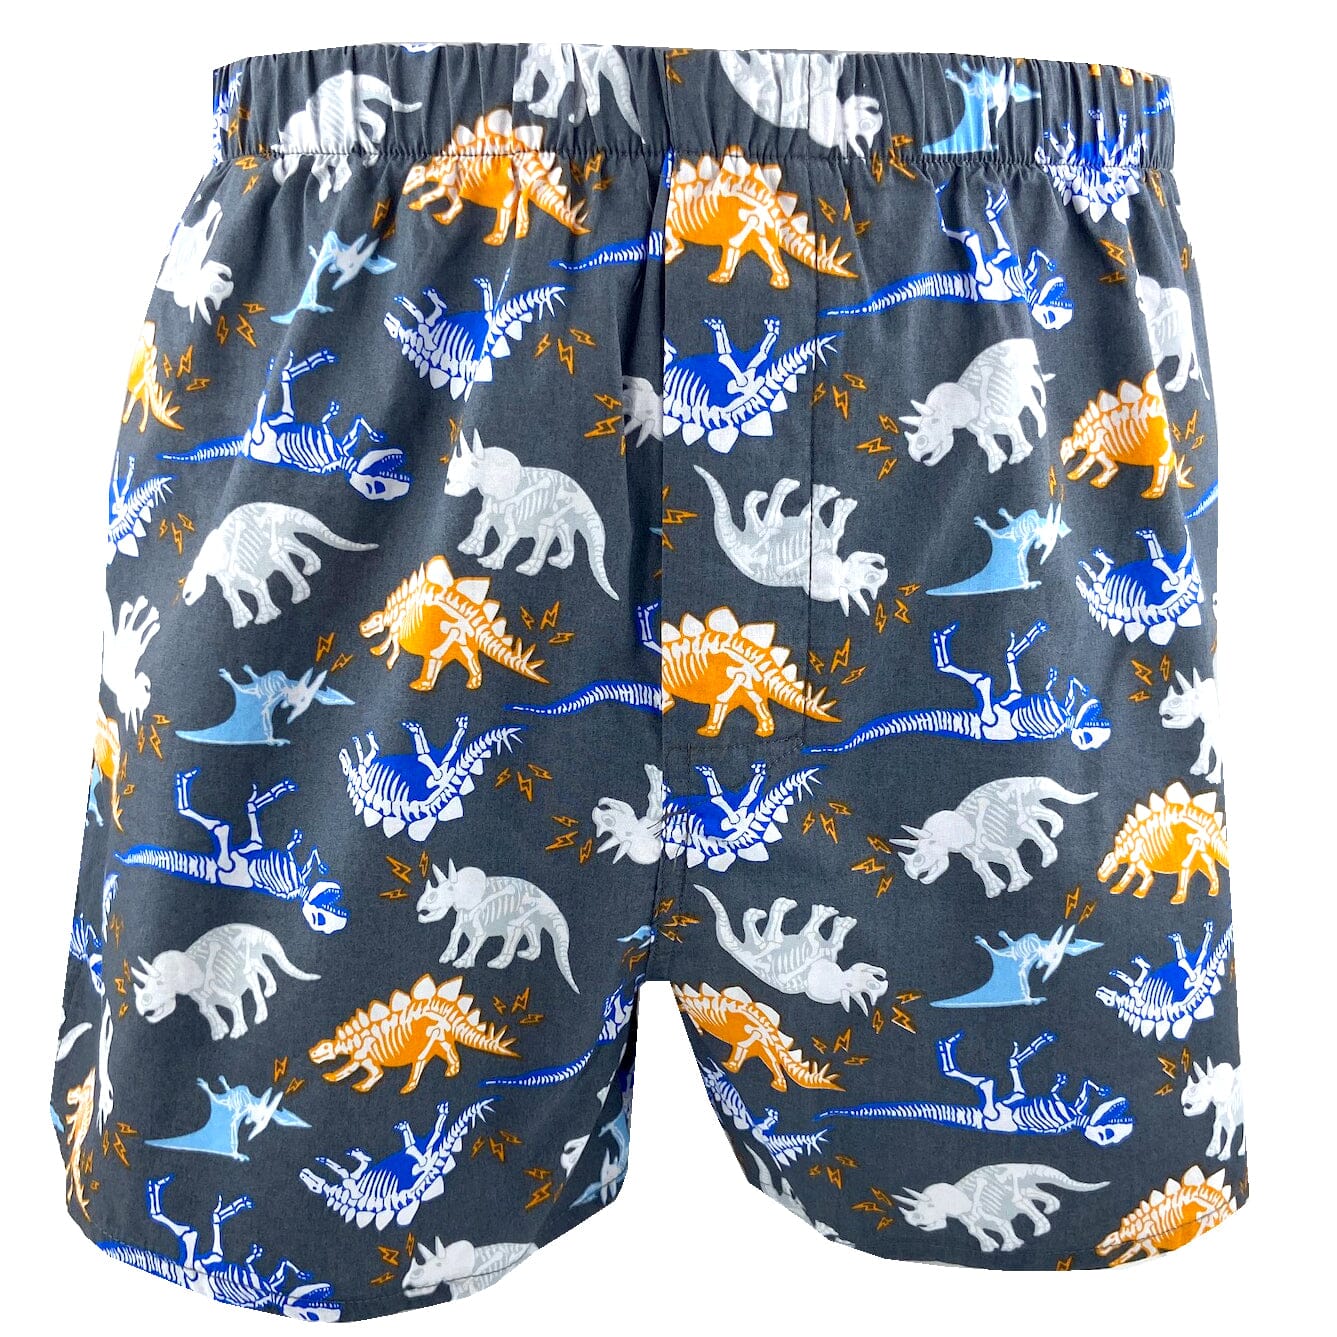  Men's Colorful Dino Fossil Patterned Cotton Lightweight Boxer Shorts